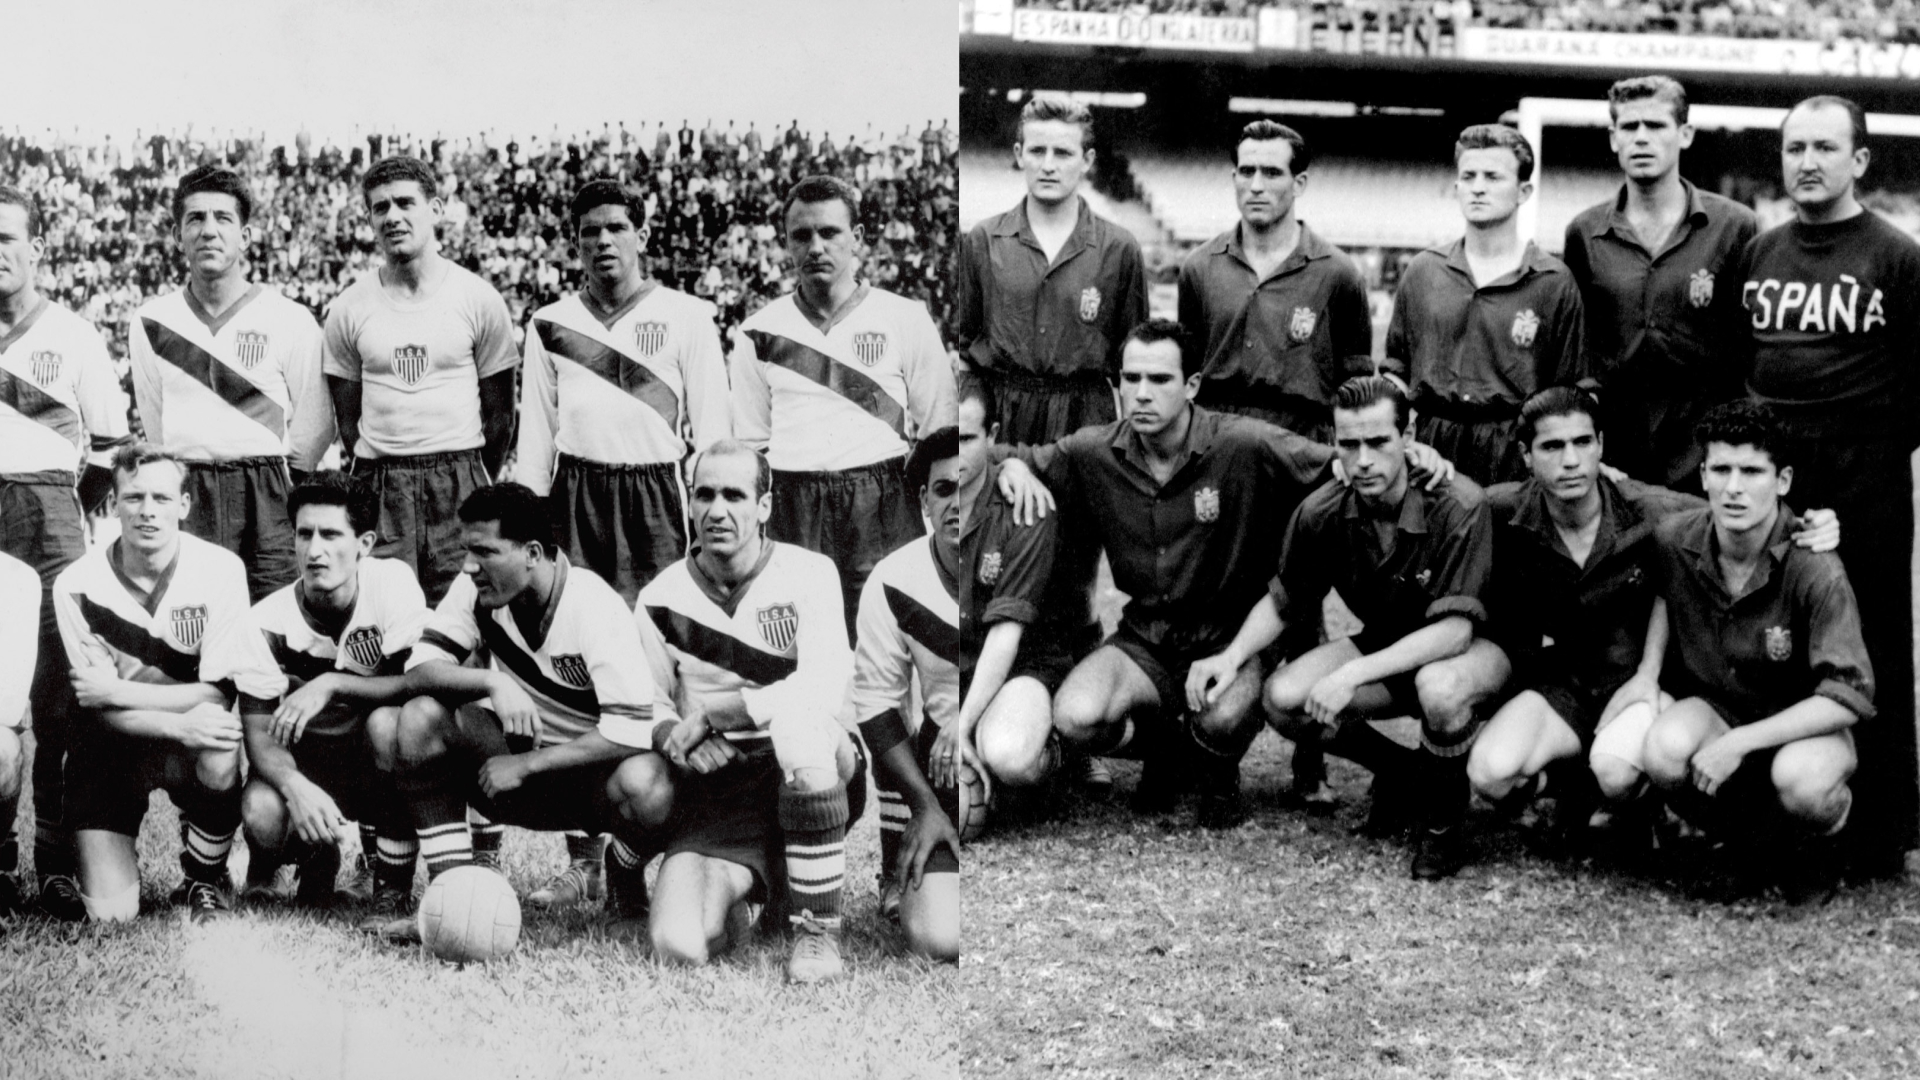 Teams from the USA and Spain at the 1950 World Cup